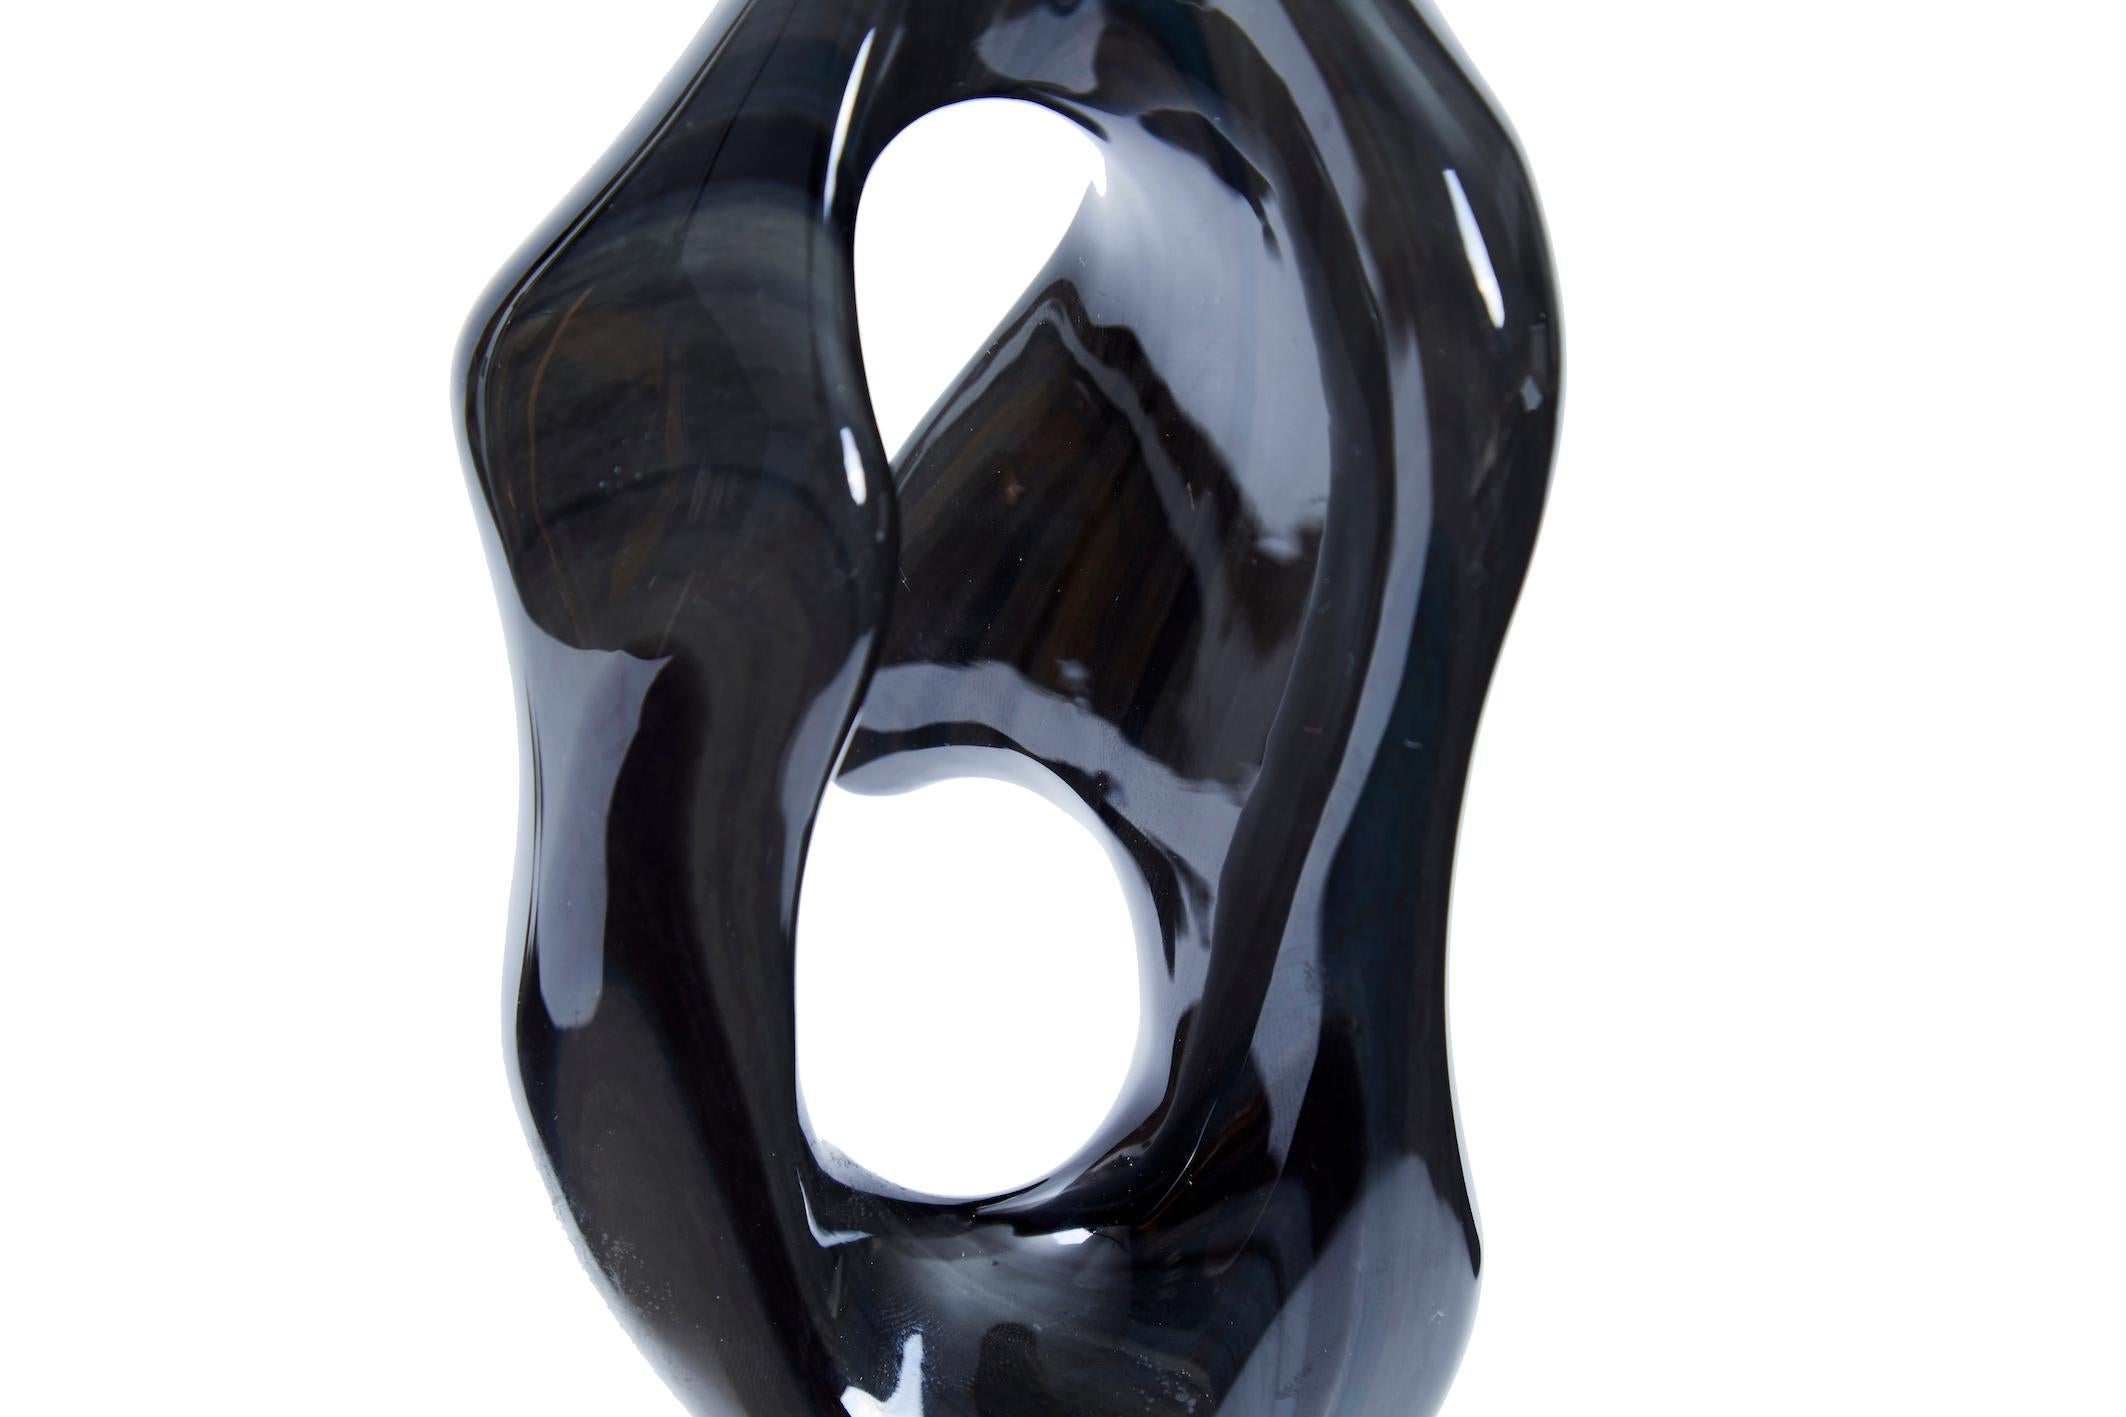 MASTERPIECE

A modern piece made of Obsidian Stone finely polished with sandpaper.

LISTING
===================================
1 Obsidian Sculputre 
===================================
DIMENSIONS
===================================

6